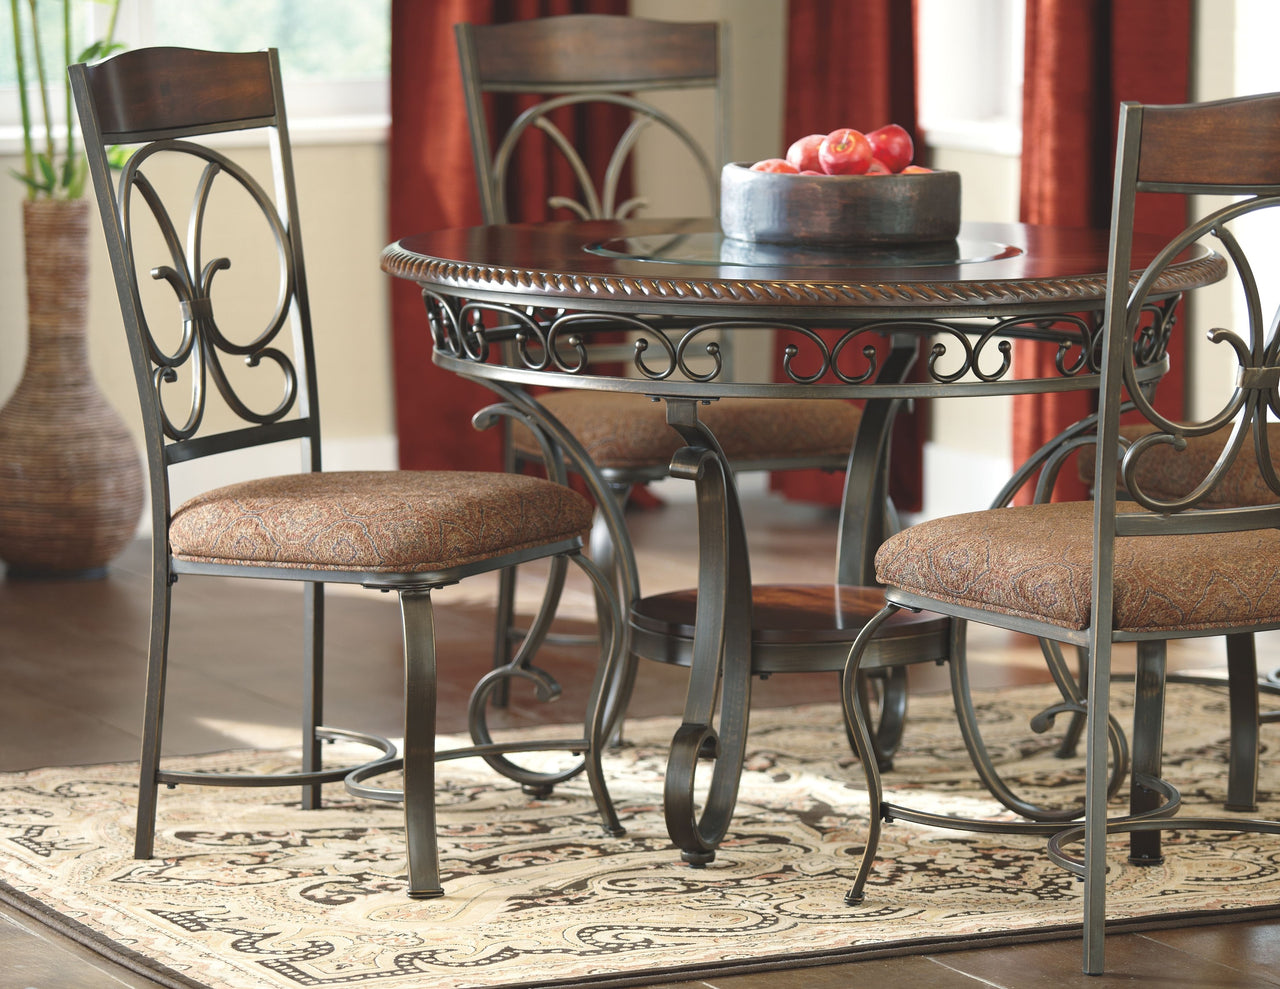 Glambrey - Brown - 5 Pc. - Dining Room Table, 4 Upholstered Side Chairs - Tony's Home Furnishings